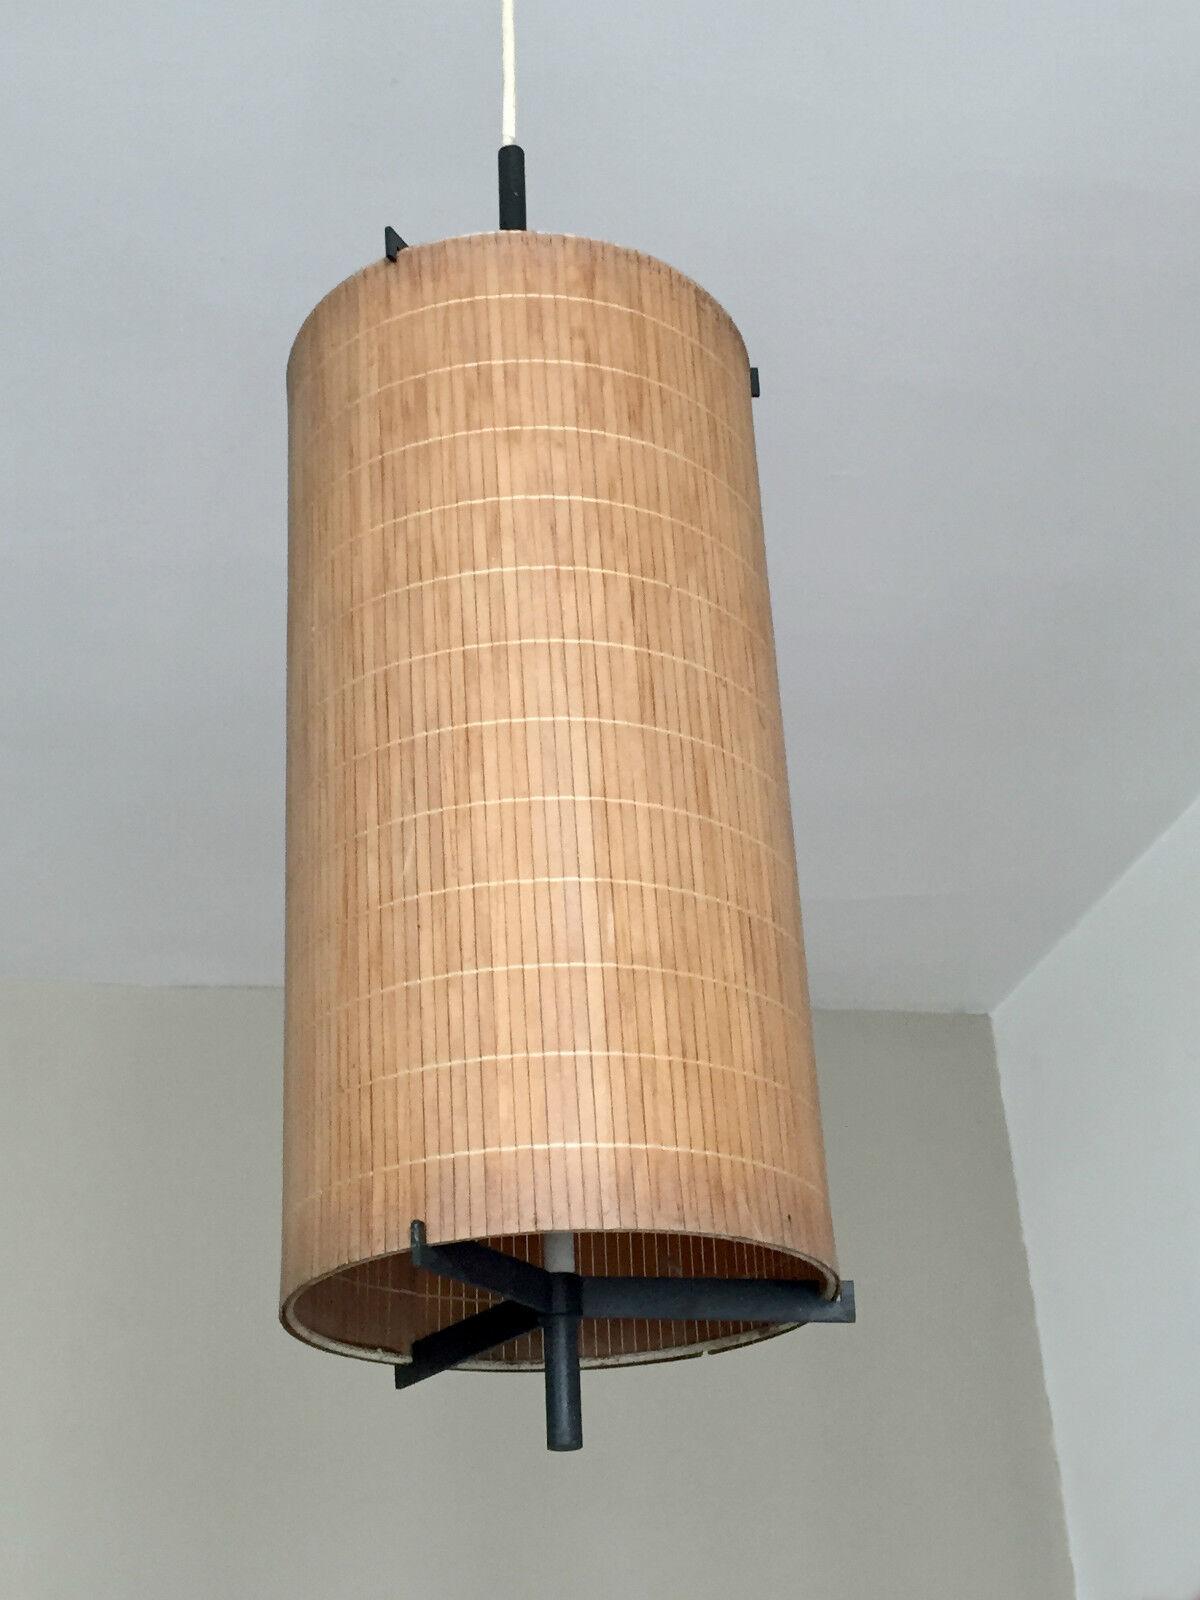 A MID-CENTURY-MODERN MODERNIST Ceiling Fixture LAMP by MAISON ARLUS, France 1950 For Sale 2